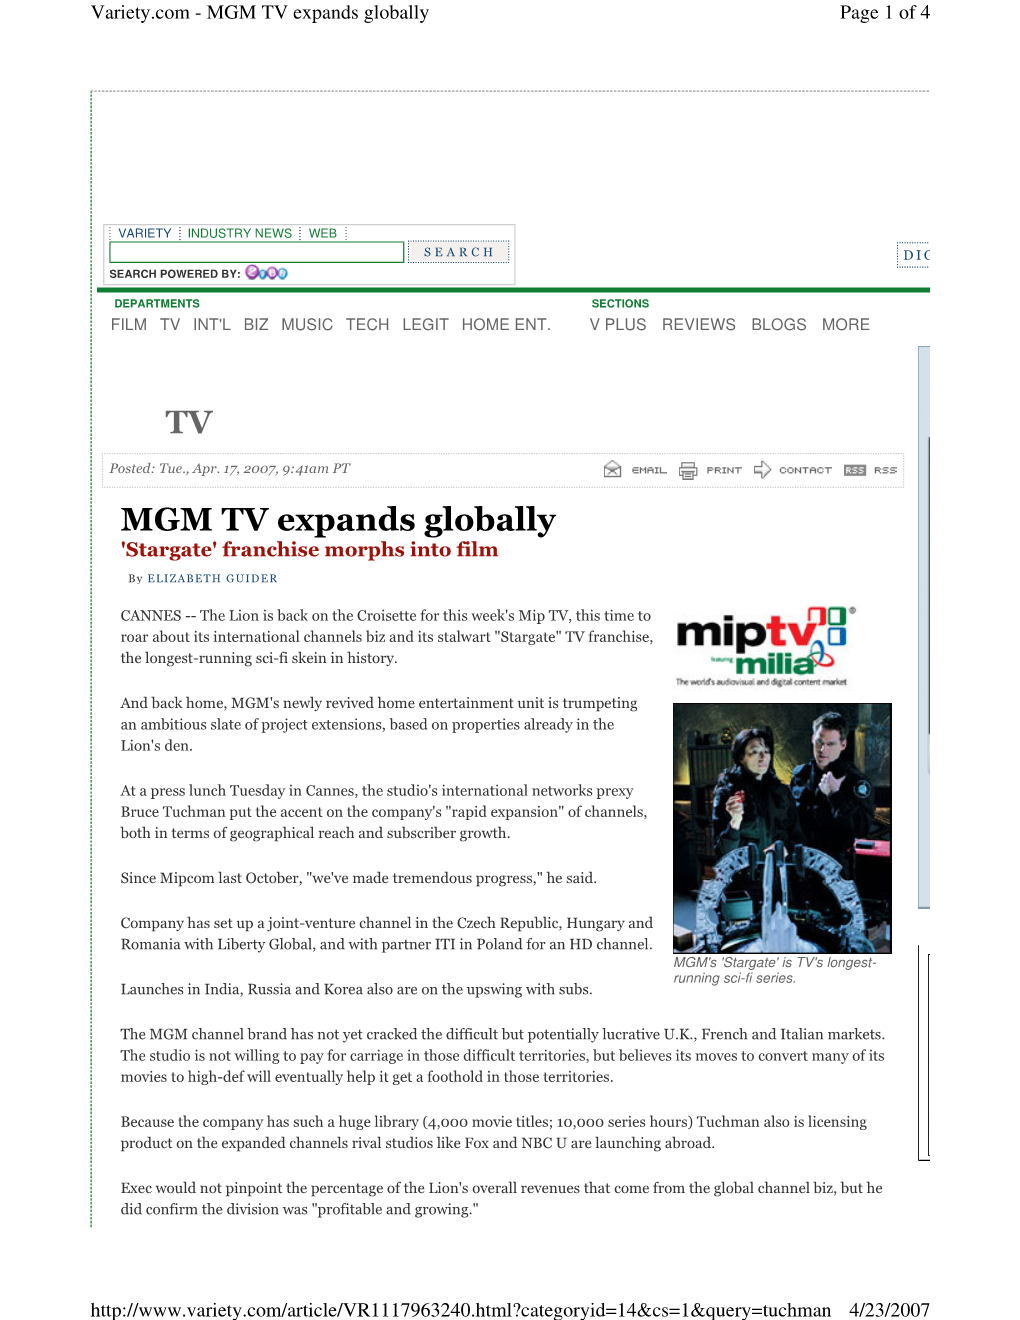 MGM TV Expands Globally TV